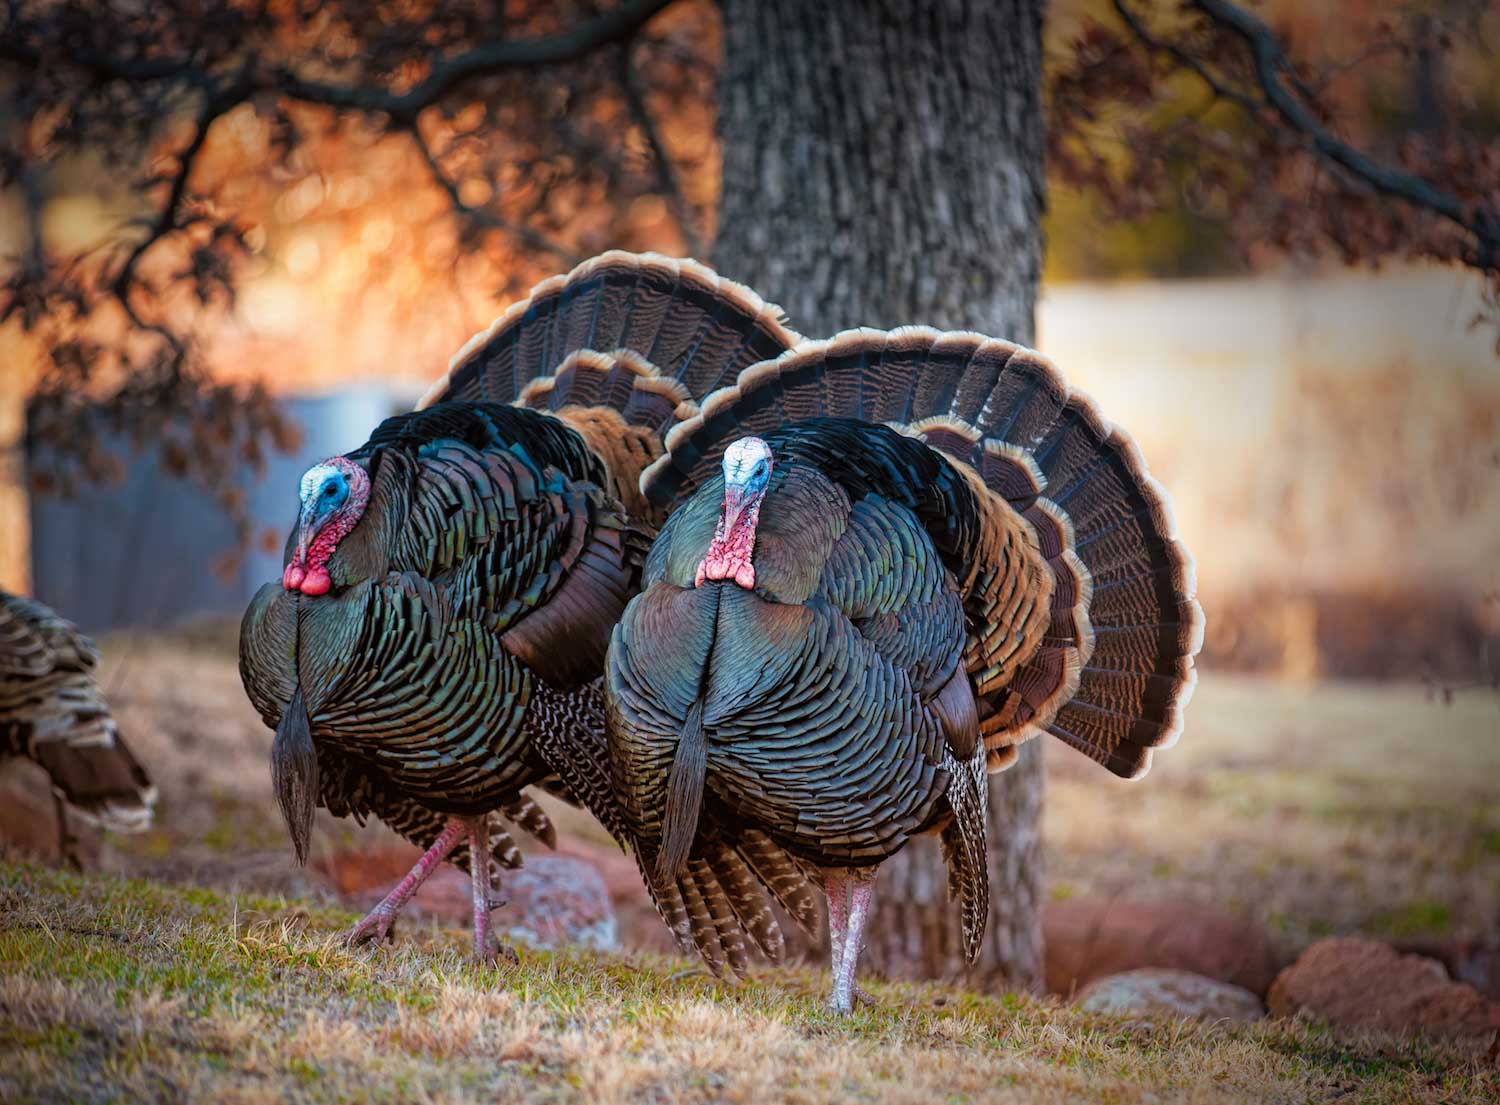 Two male wild turkeys with their feathers fanned out walking across the grass in front of a tree.